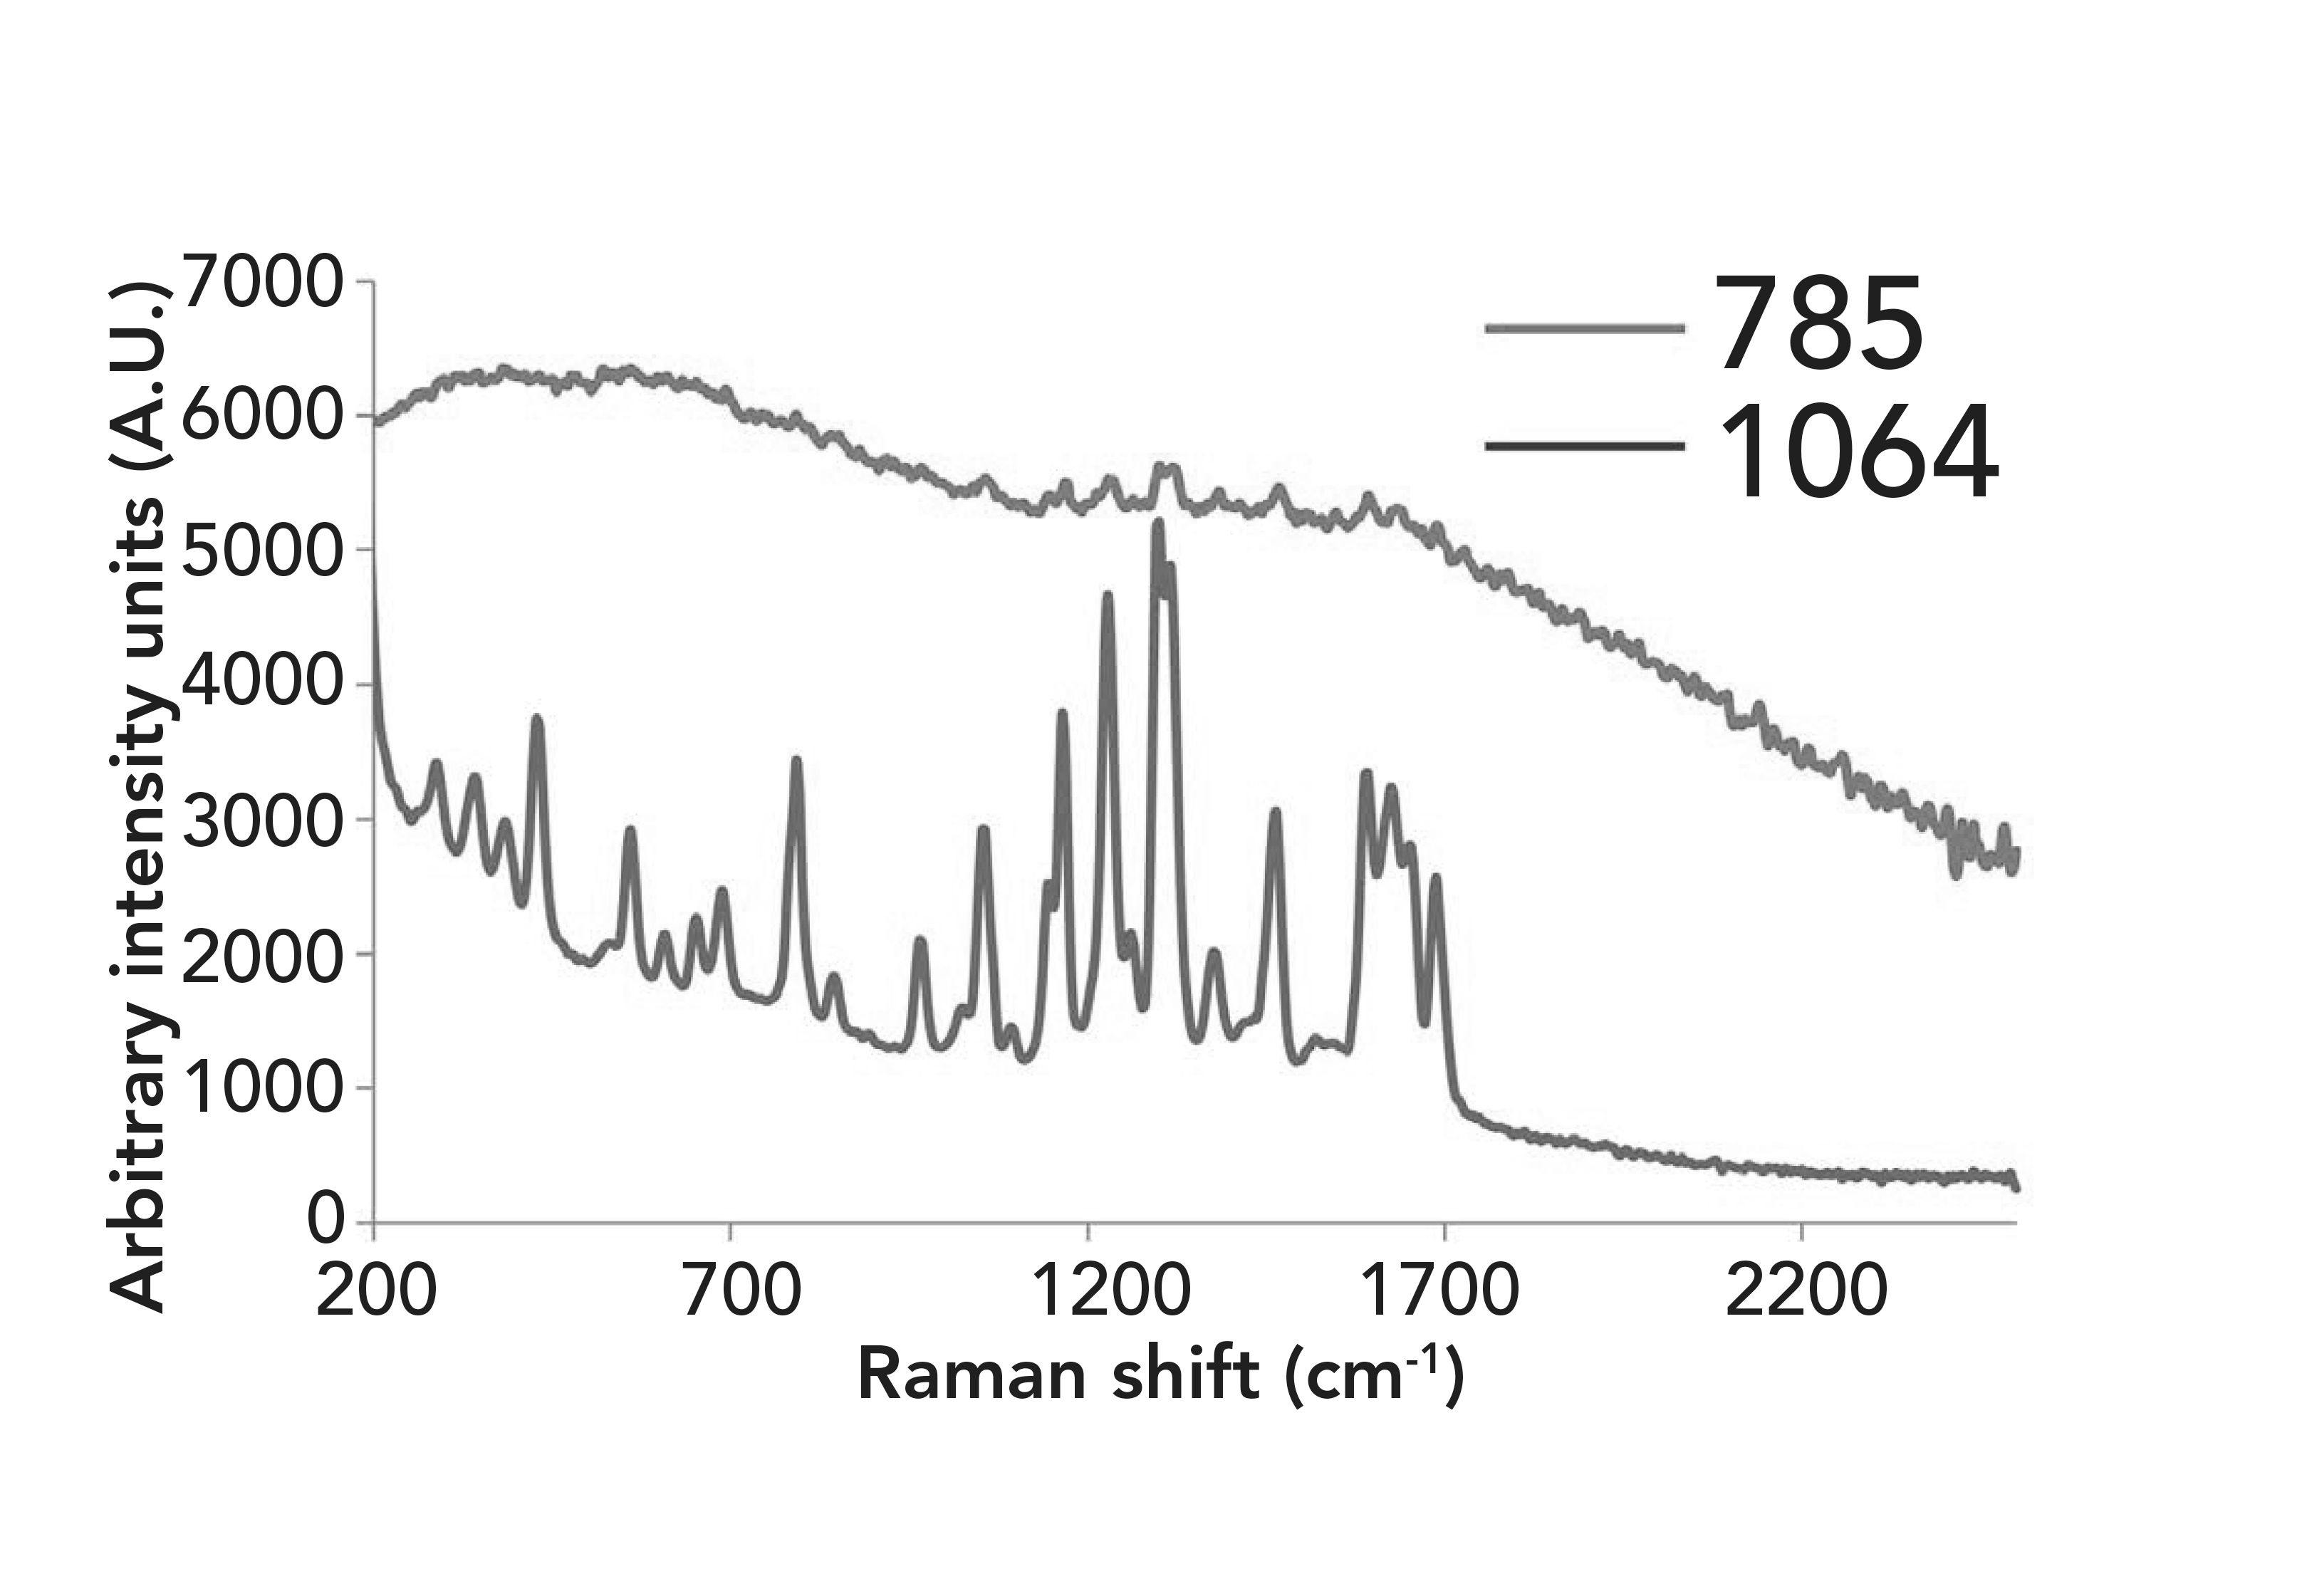 Figure 1: Comparison of Raman spectra of N-acetylanthranilic acid with (a) 785 nm and (b) 1064 nm laser excitation.